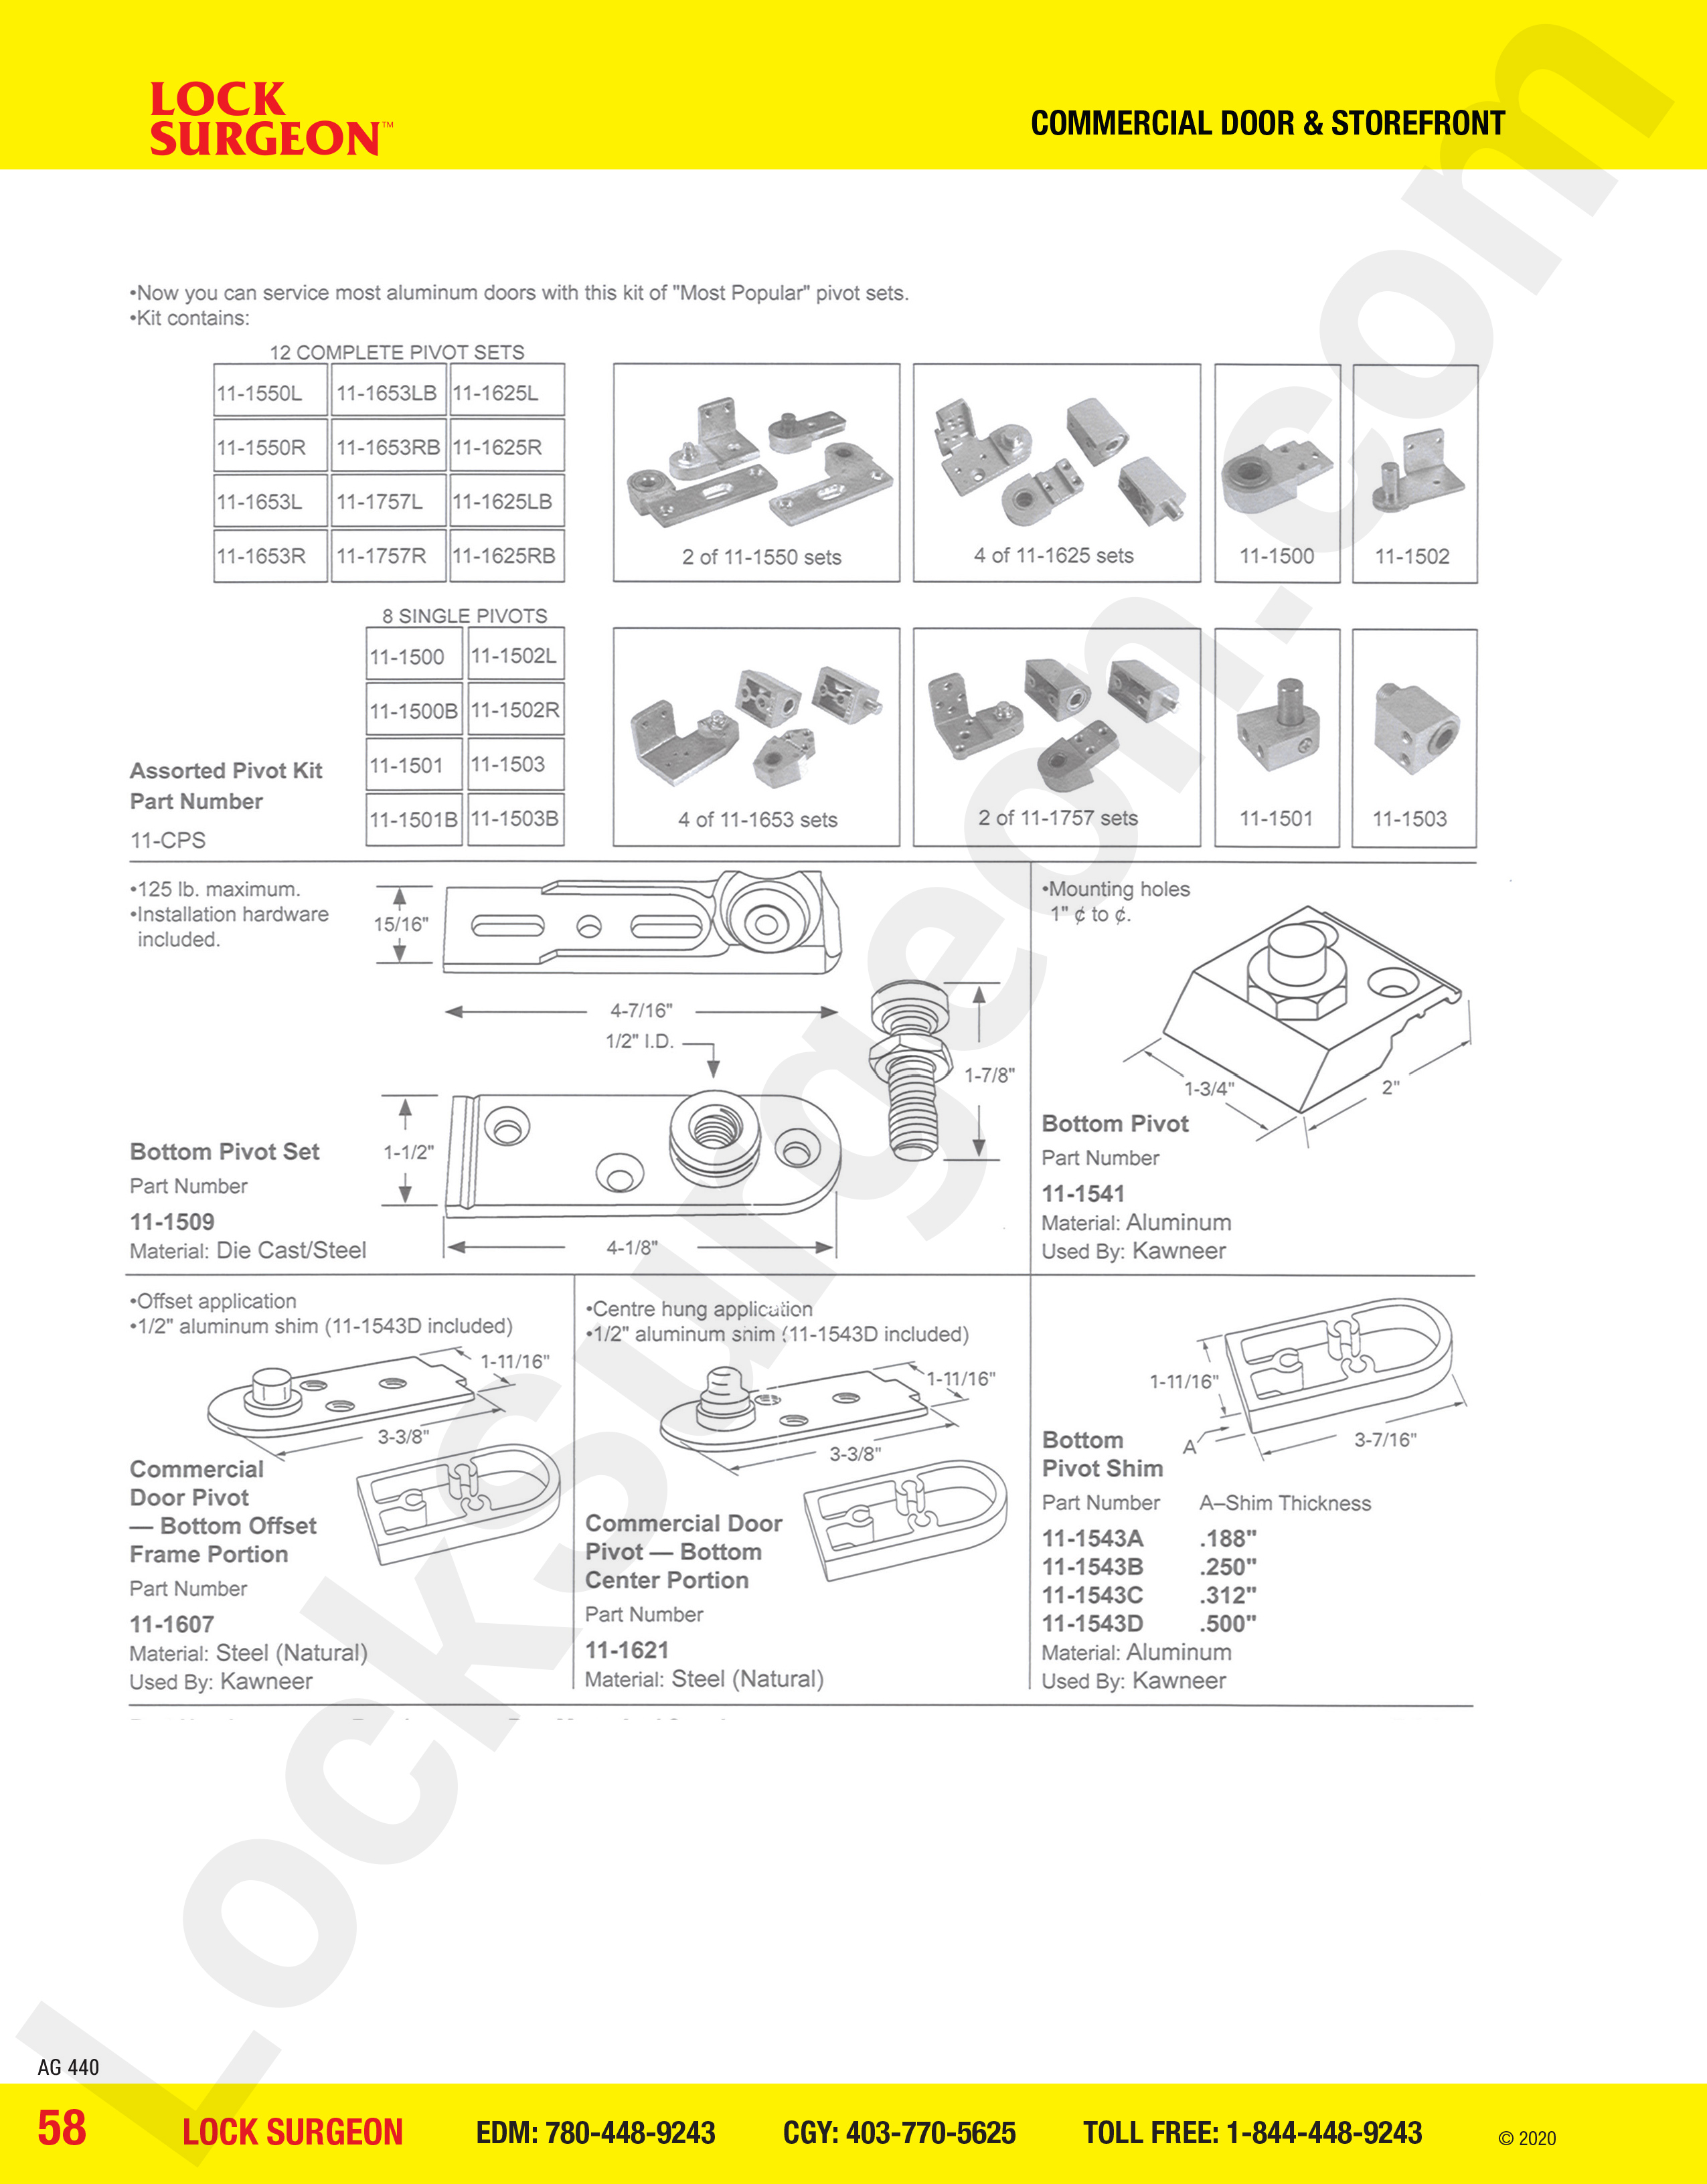 Commercial Door and Storefront parts for assorted Kawneer pivot kits